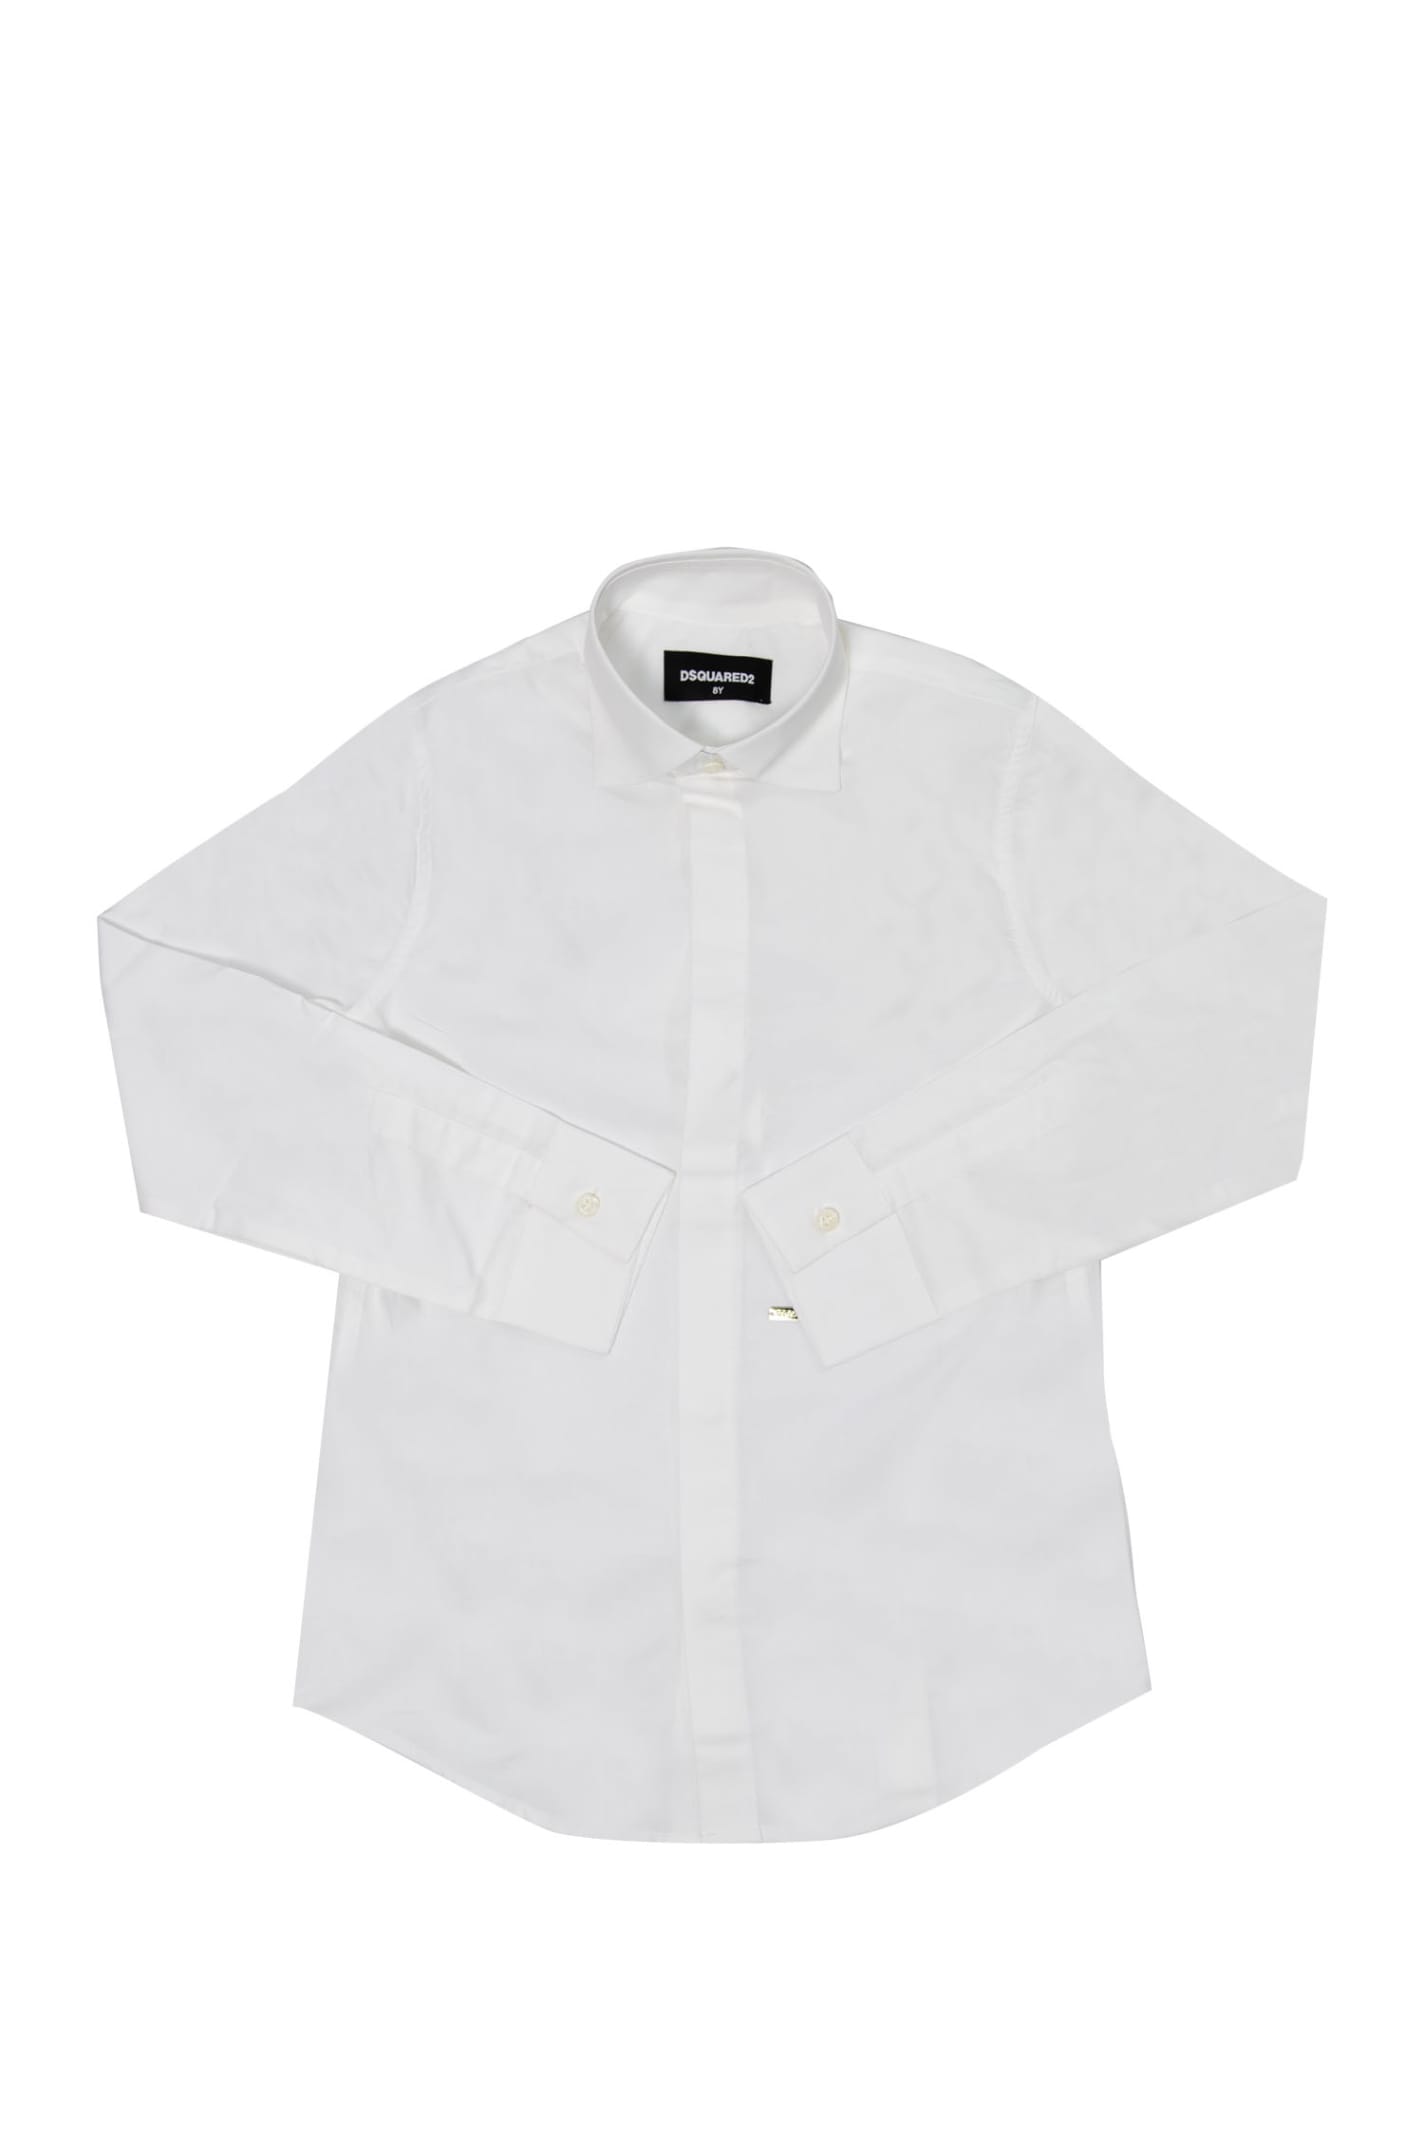 Dsquared2 Kids' Cotton Shirt In White